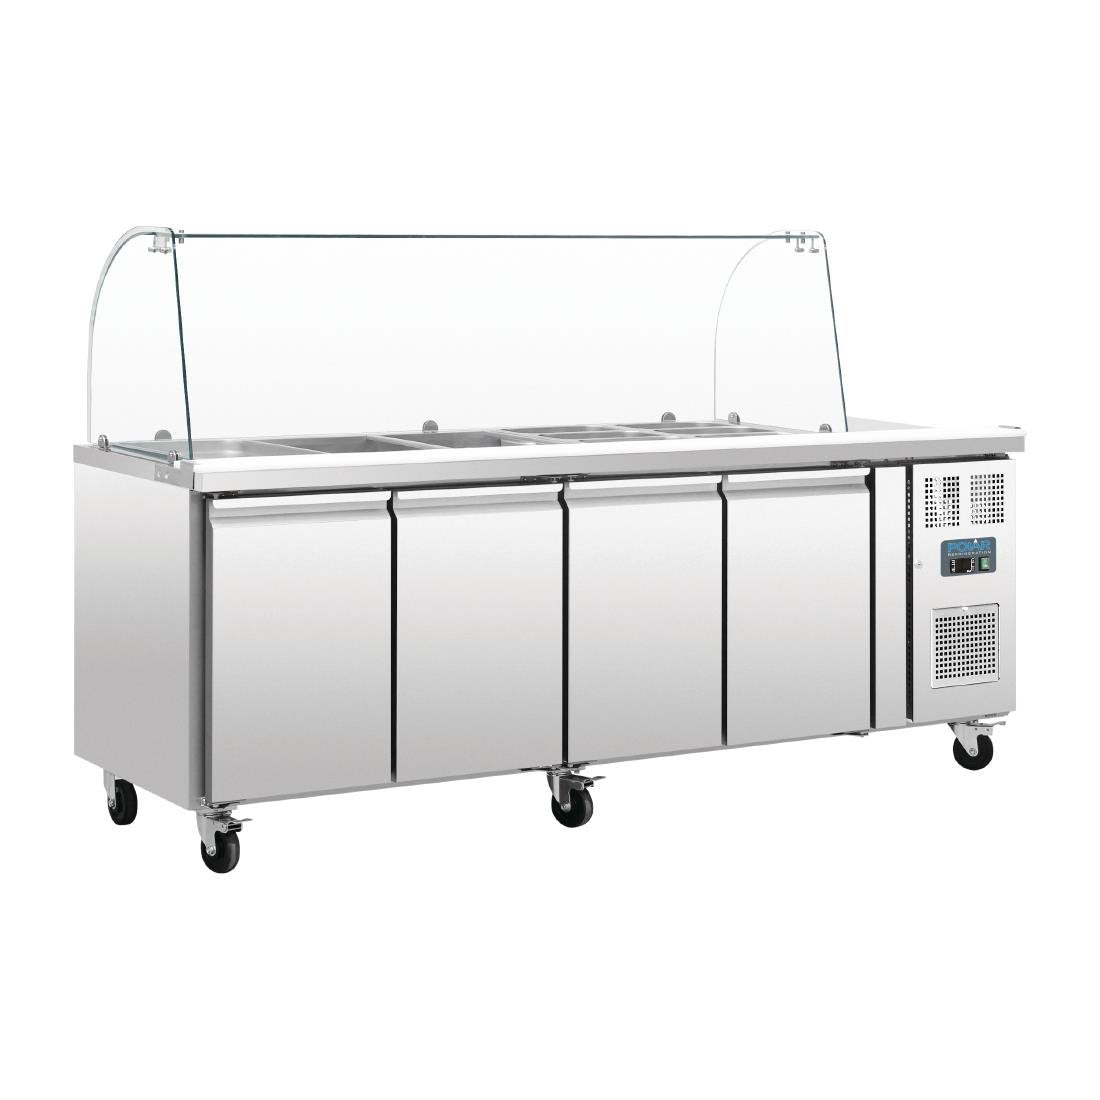 Polar U-Series Four Door Refrigerated Gastronorm Saladette Counter CT395